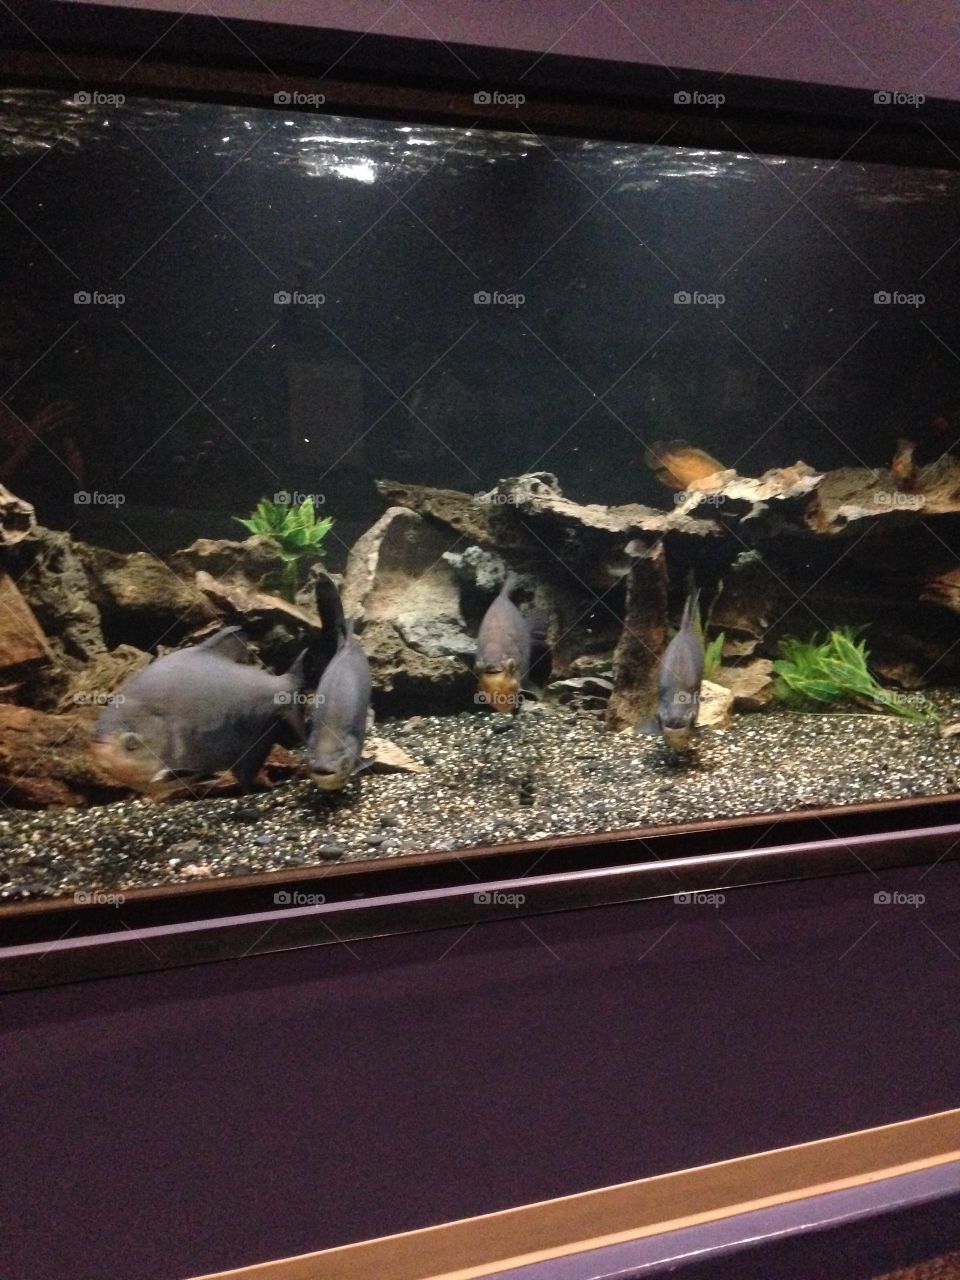 These fish just stared at anyone who walked by. 